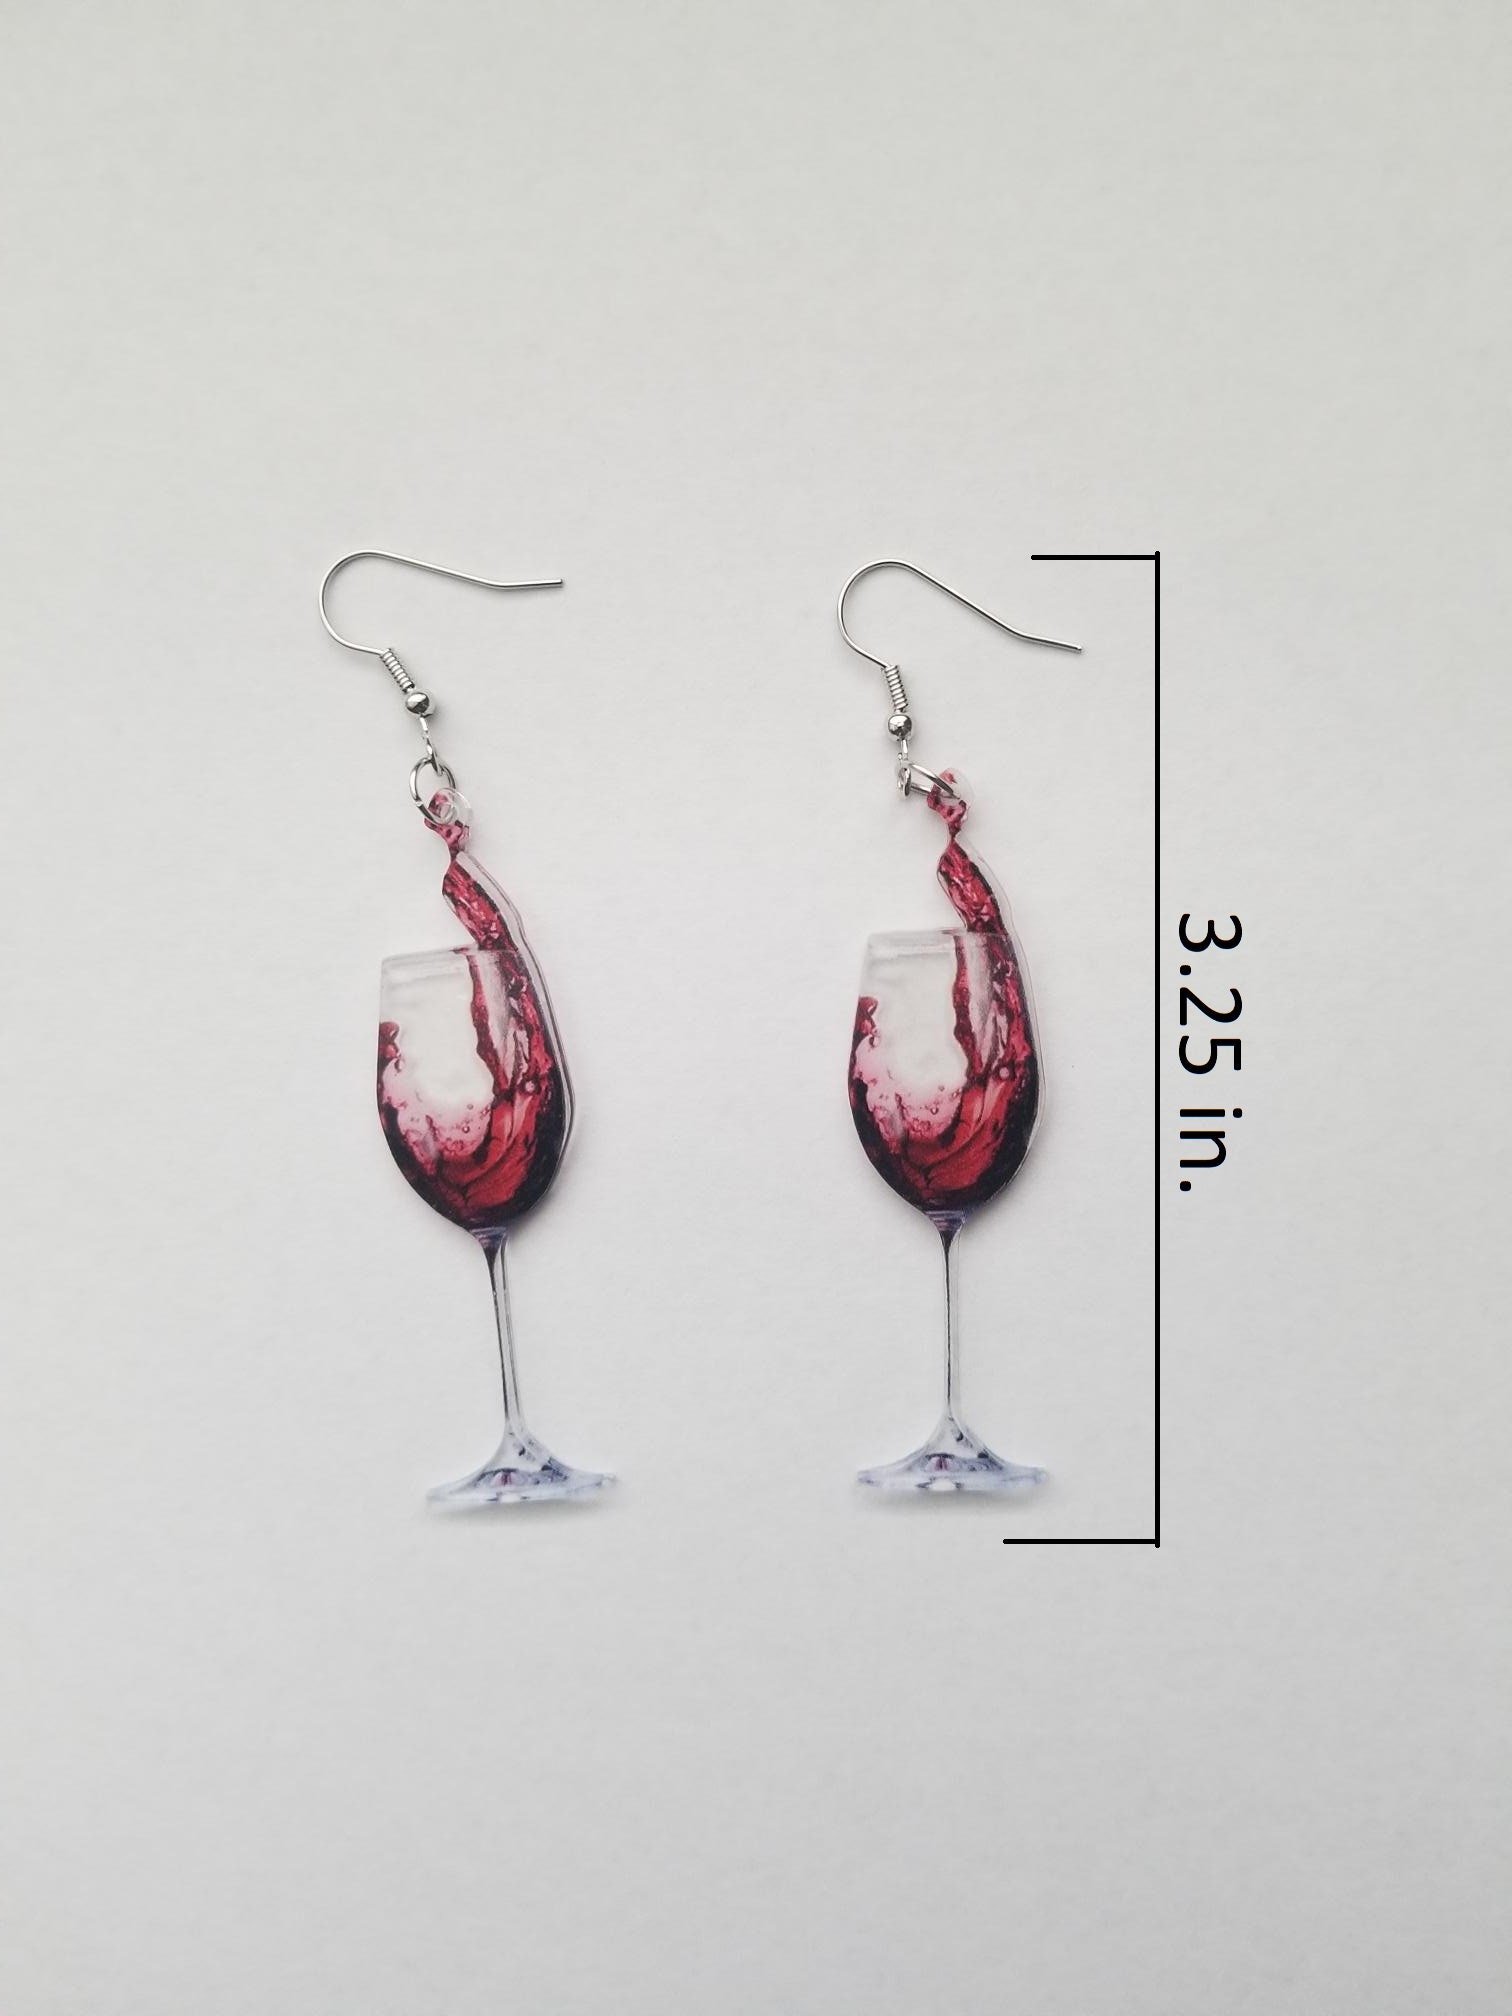 Suclain 8 Pcs Funny Wine Glasses Fancy Shaped Wine Glass Cute Cocktail  Glasses Cool Drinking Glasses…See more Suclain 8 Pcs Funny Wine Glasses  Fancy